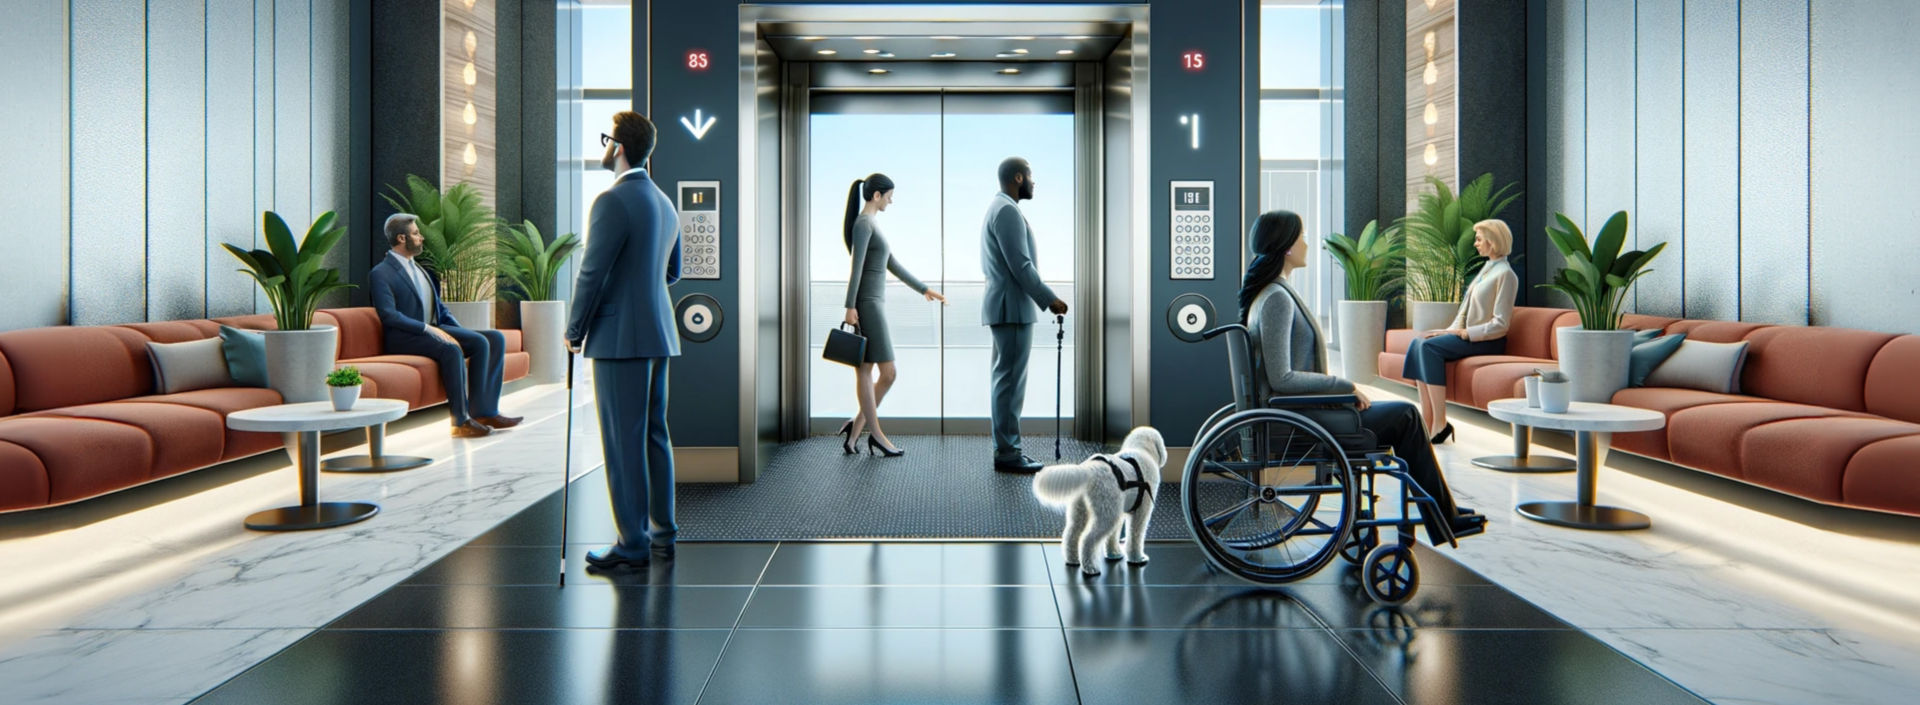 elevator-industry-adapted-to-meet-needs-of-people-with-disabilities:1920x705%28hero%29